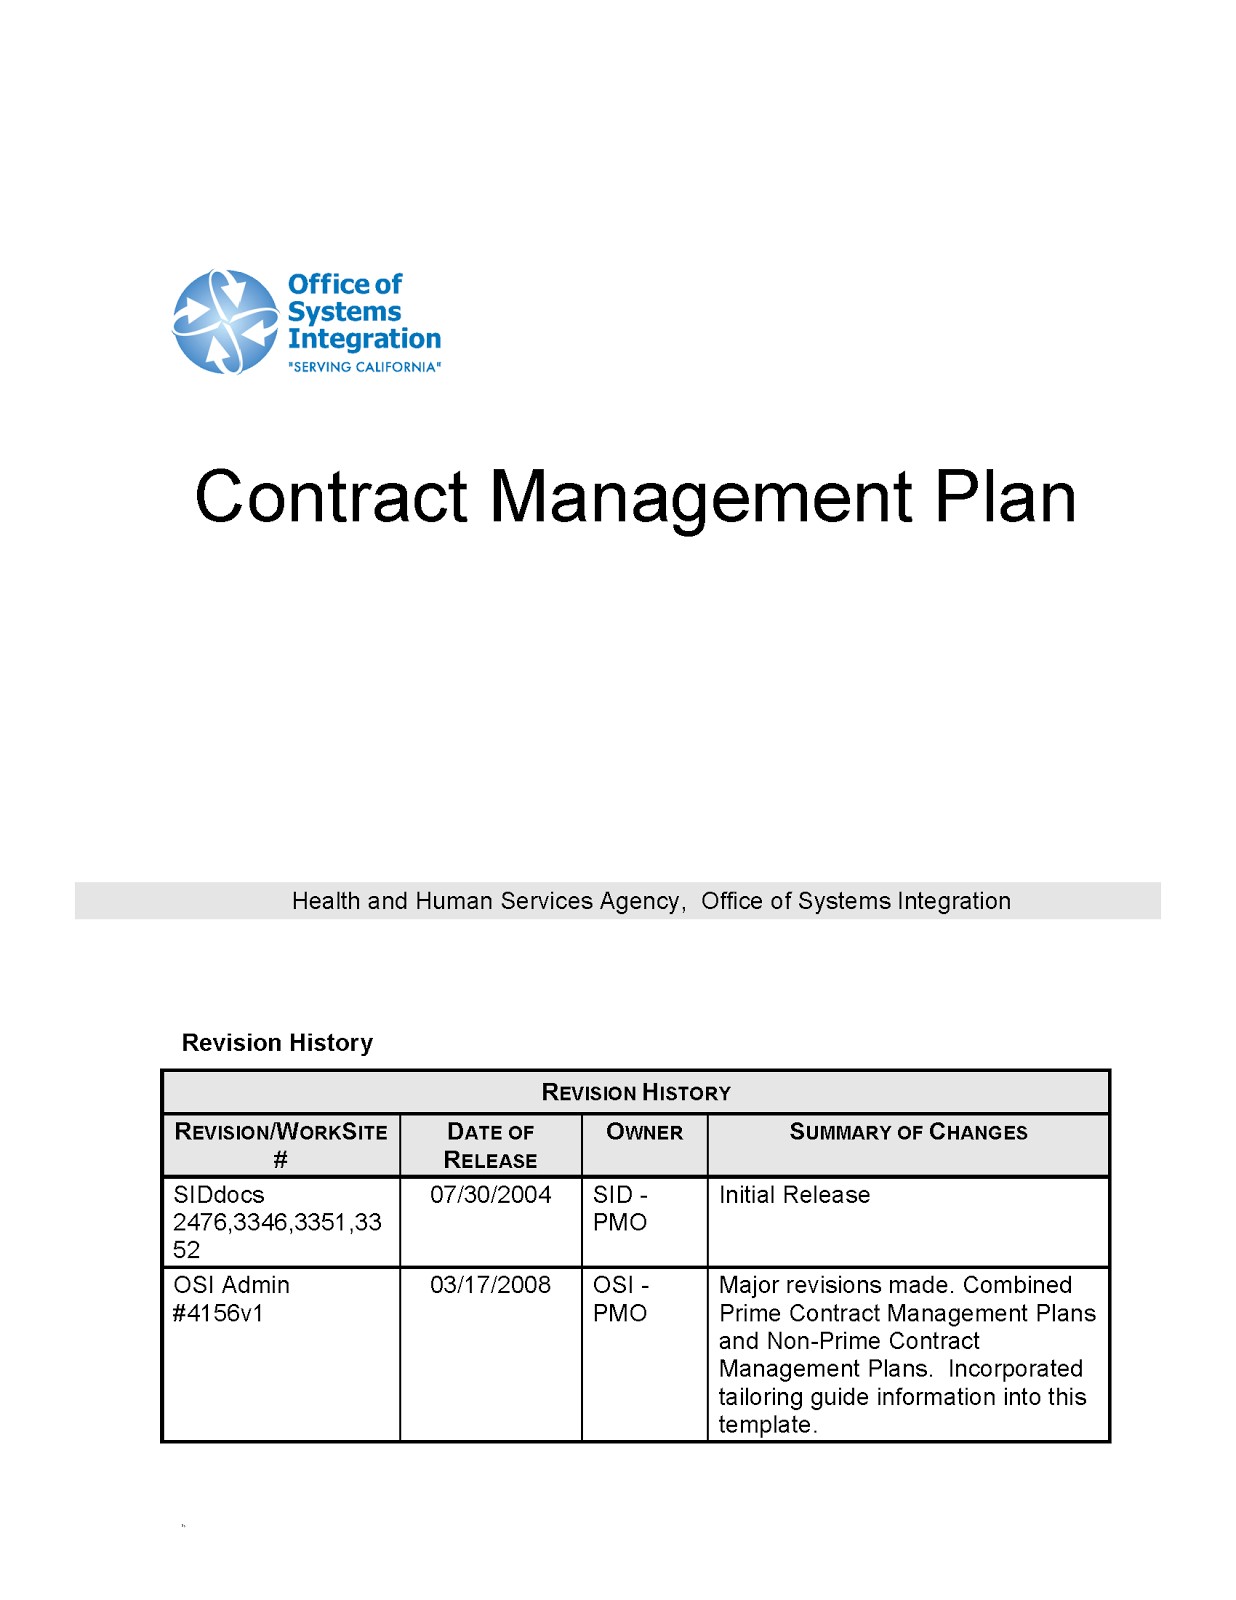 Contract Management Plan ENGINEERING MANAGEMENT Document Sample